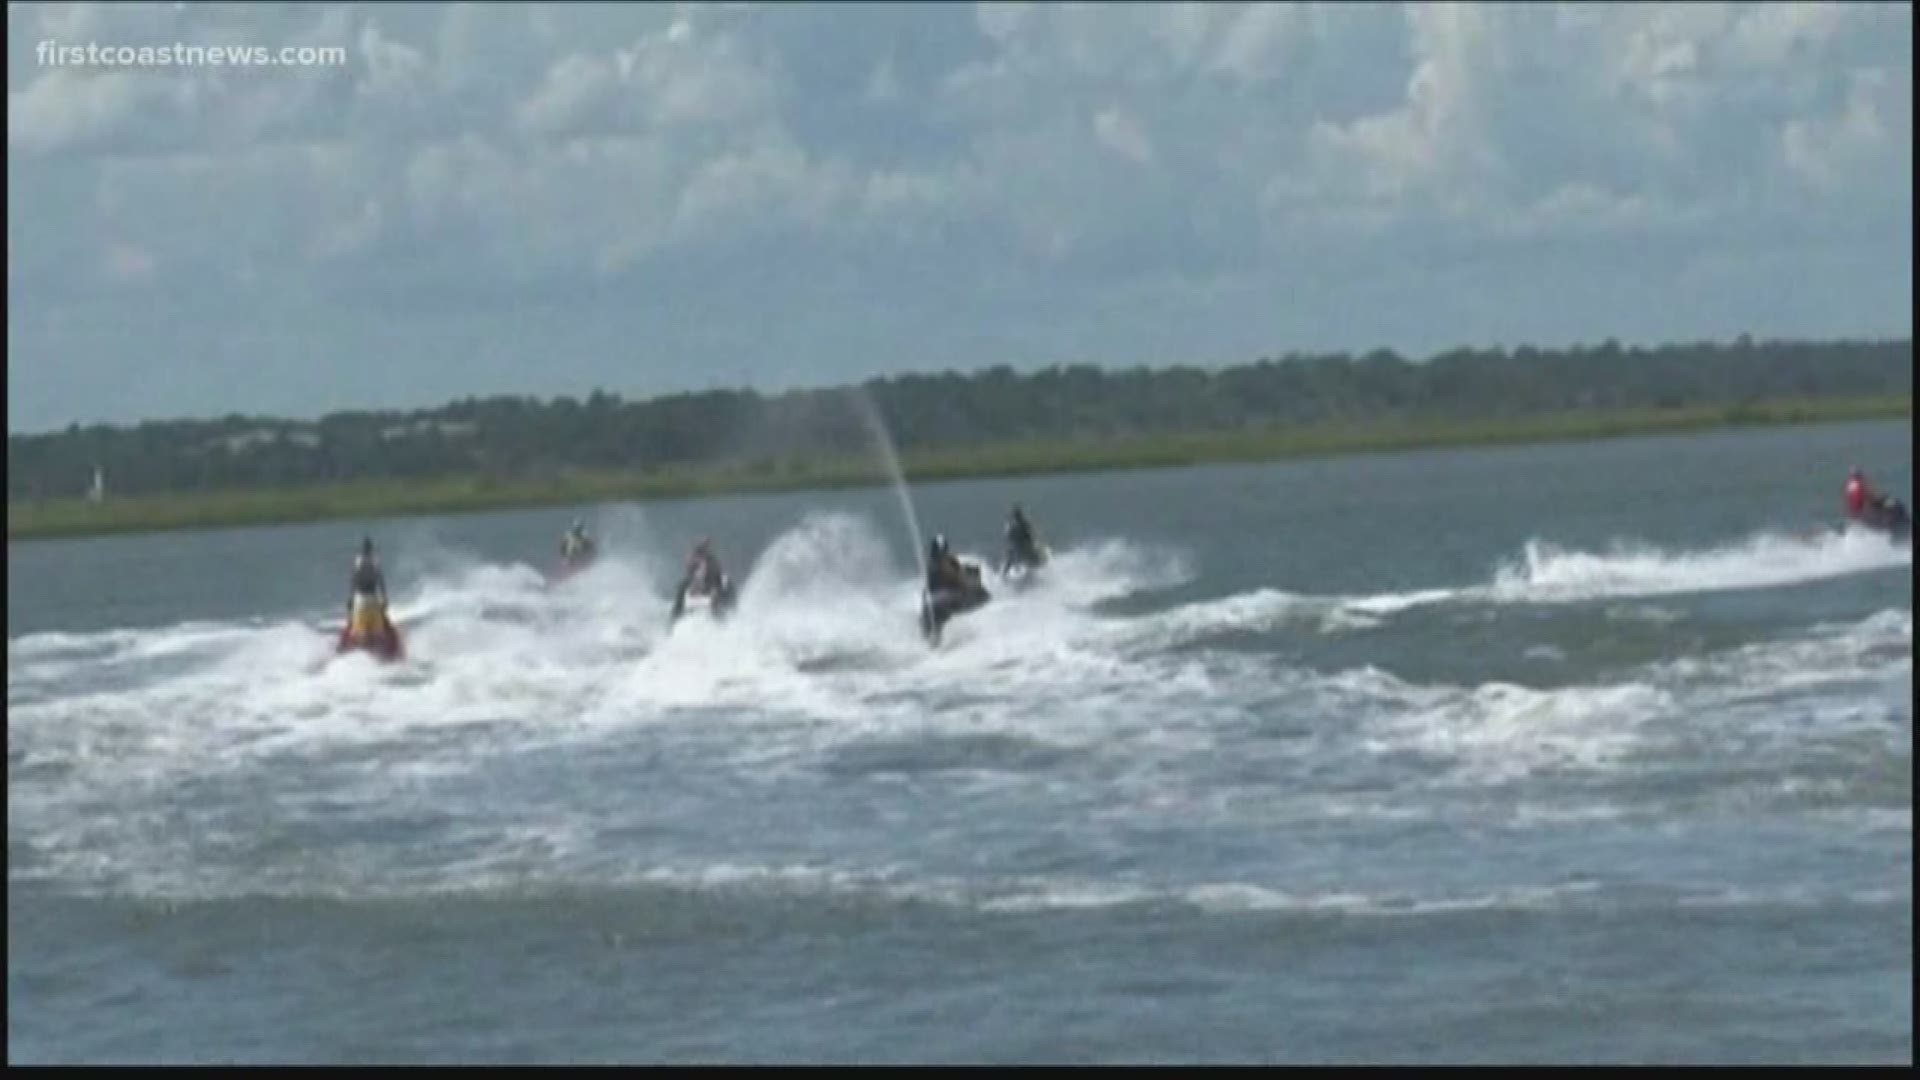 Good Samaritans helped rescue a person who went into cardiac arrest Saturday following a Jet Ski crash near the St. Augustine Inlet, according to St. Johns County Fire Rescue.